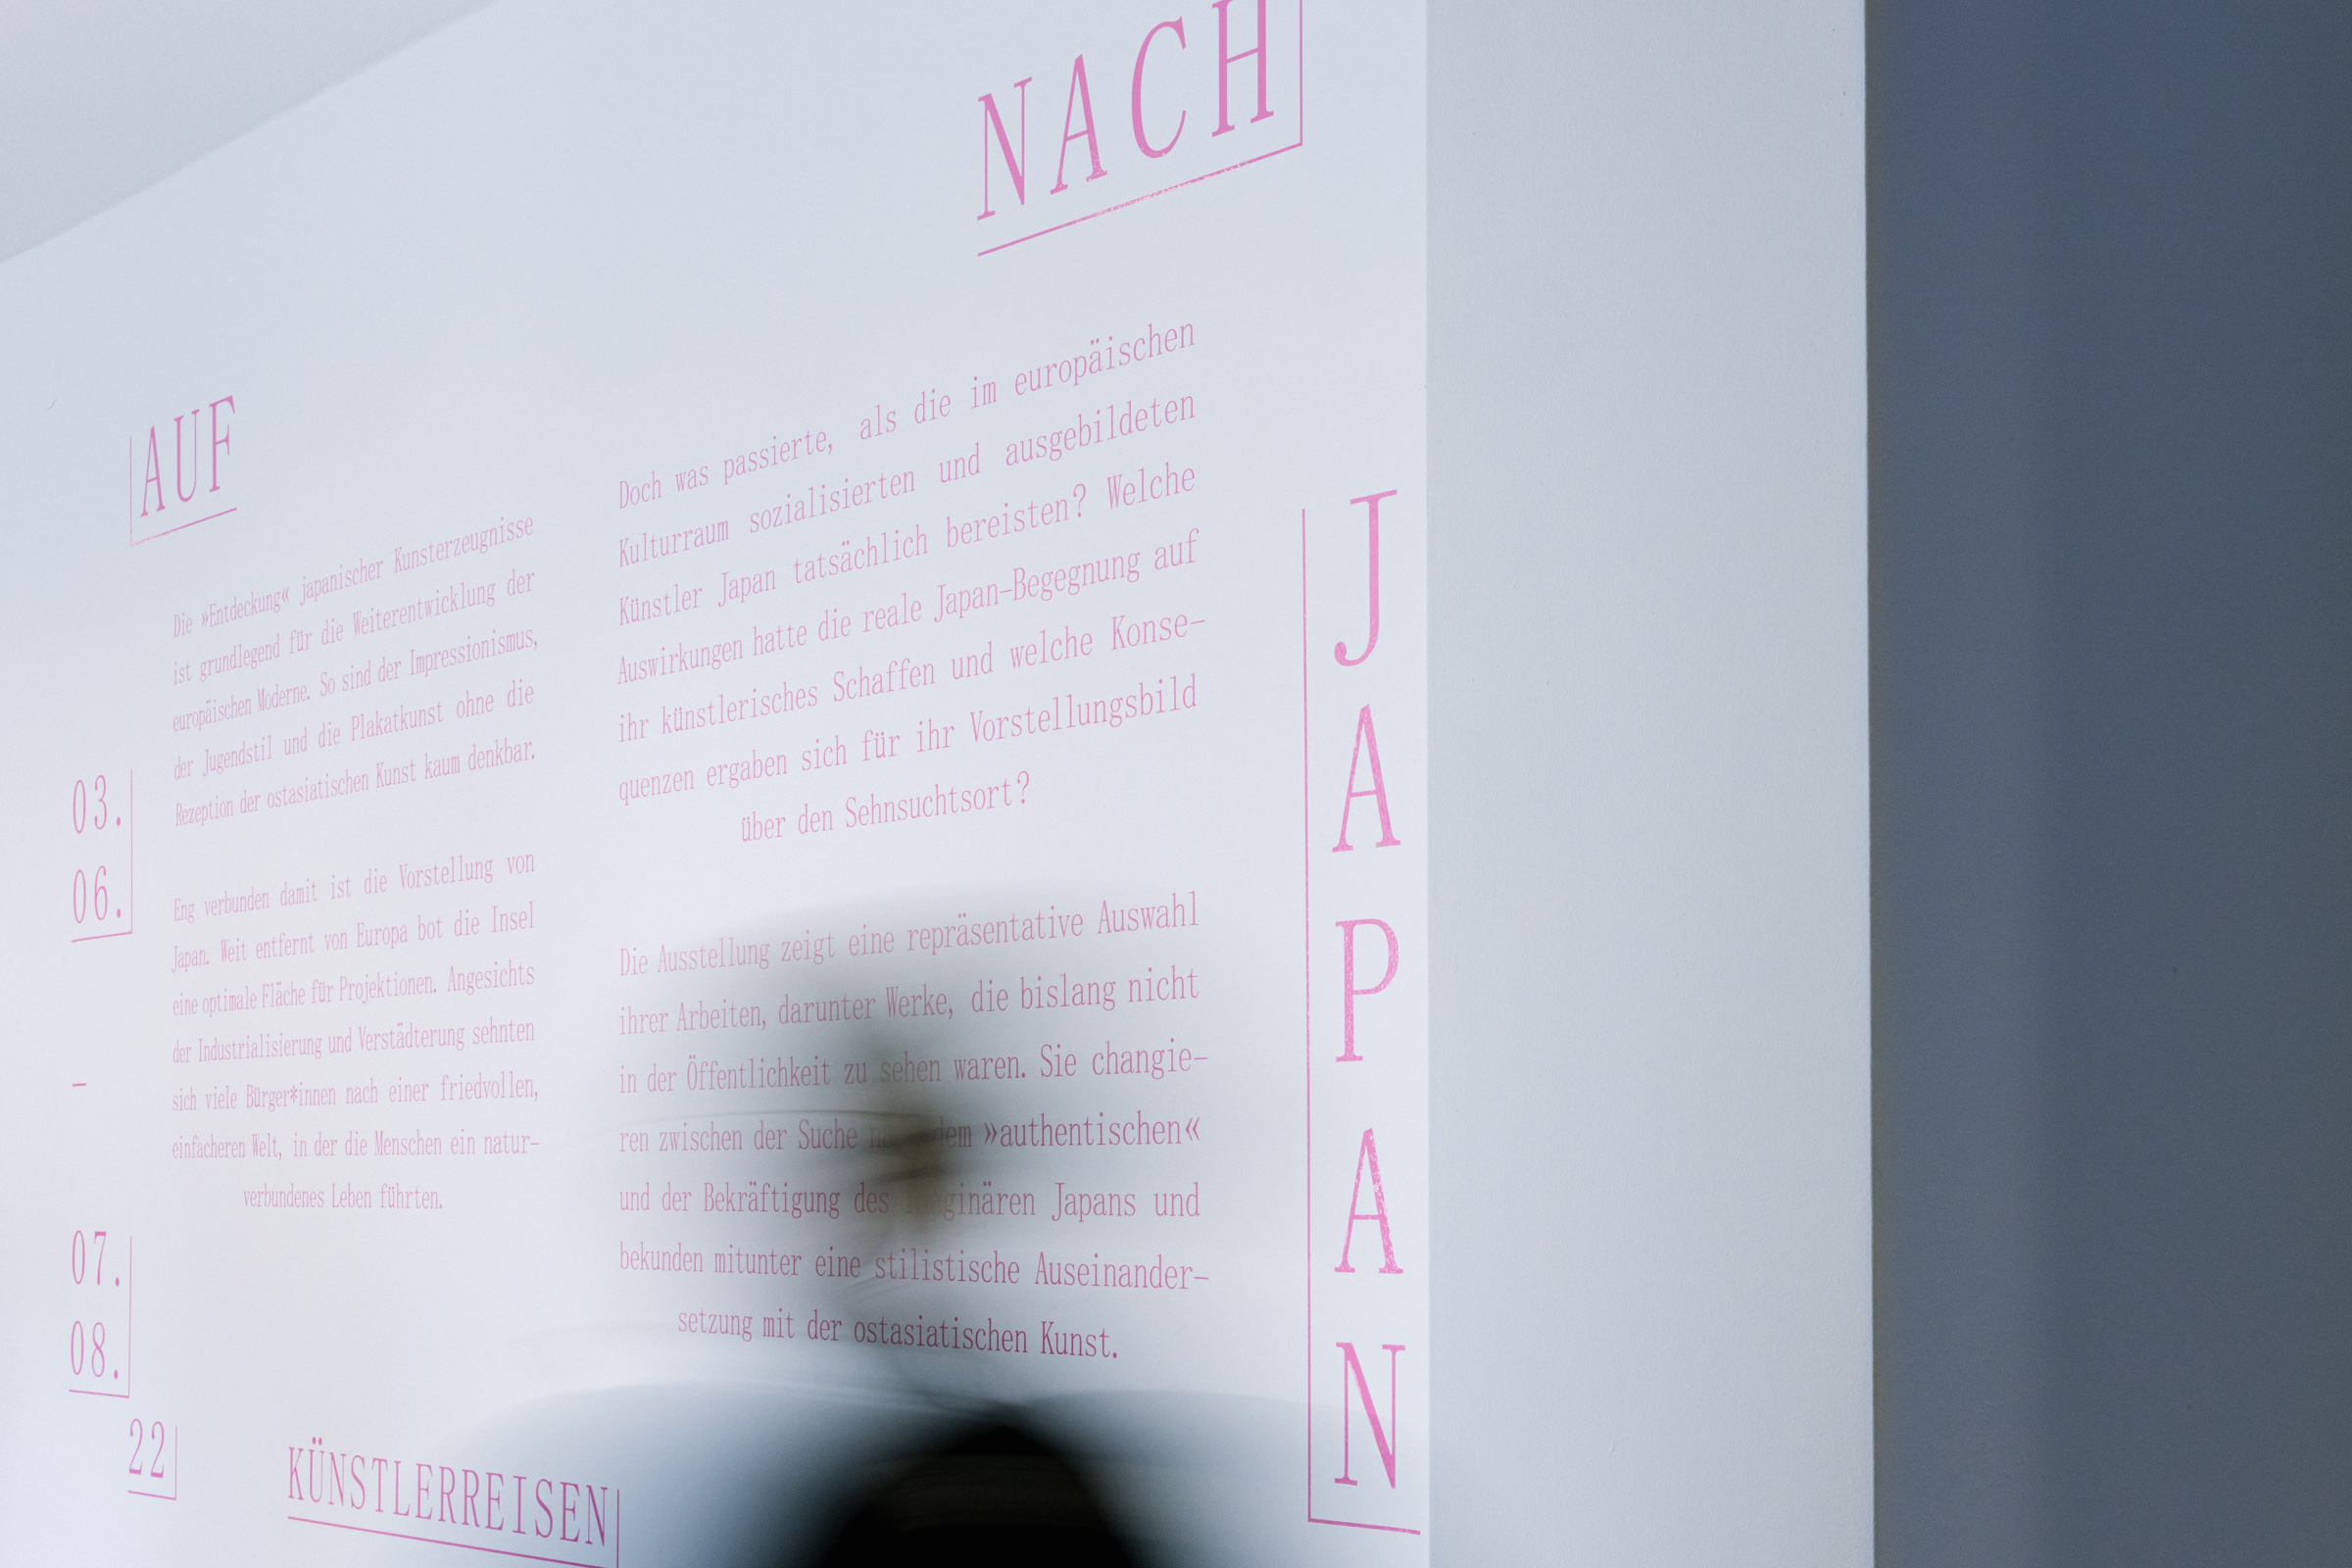 Wall graphics for »Auf nach Japan!« [Off To Japan!]